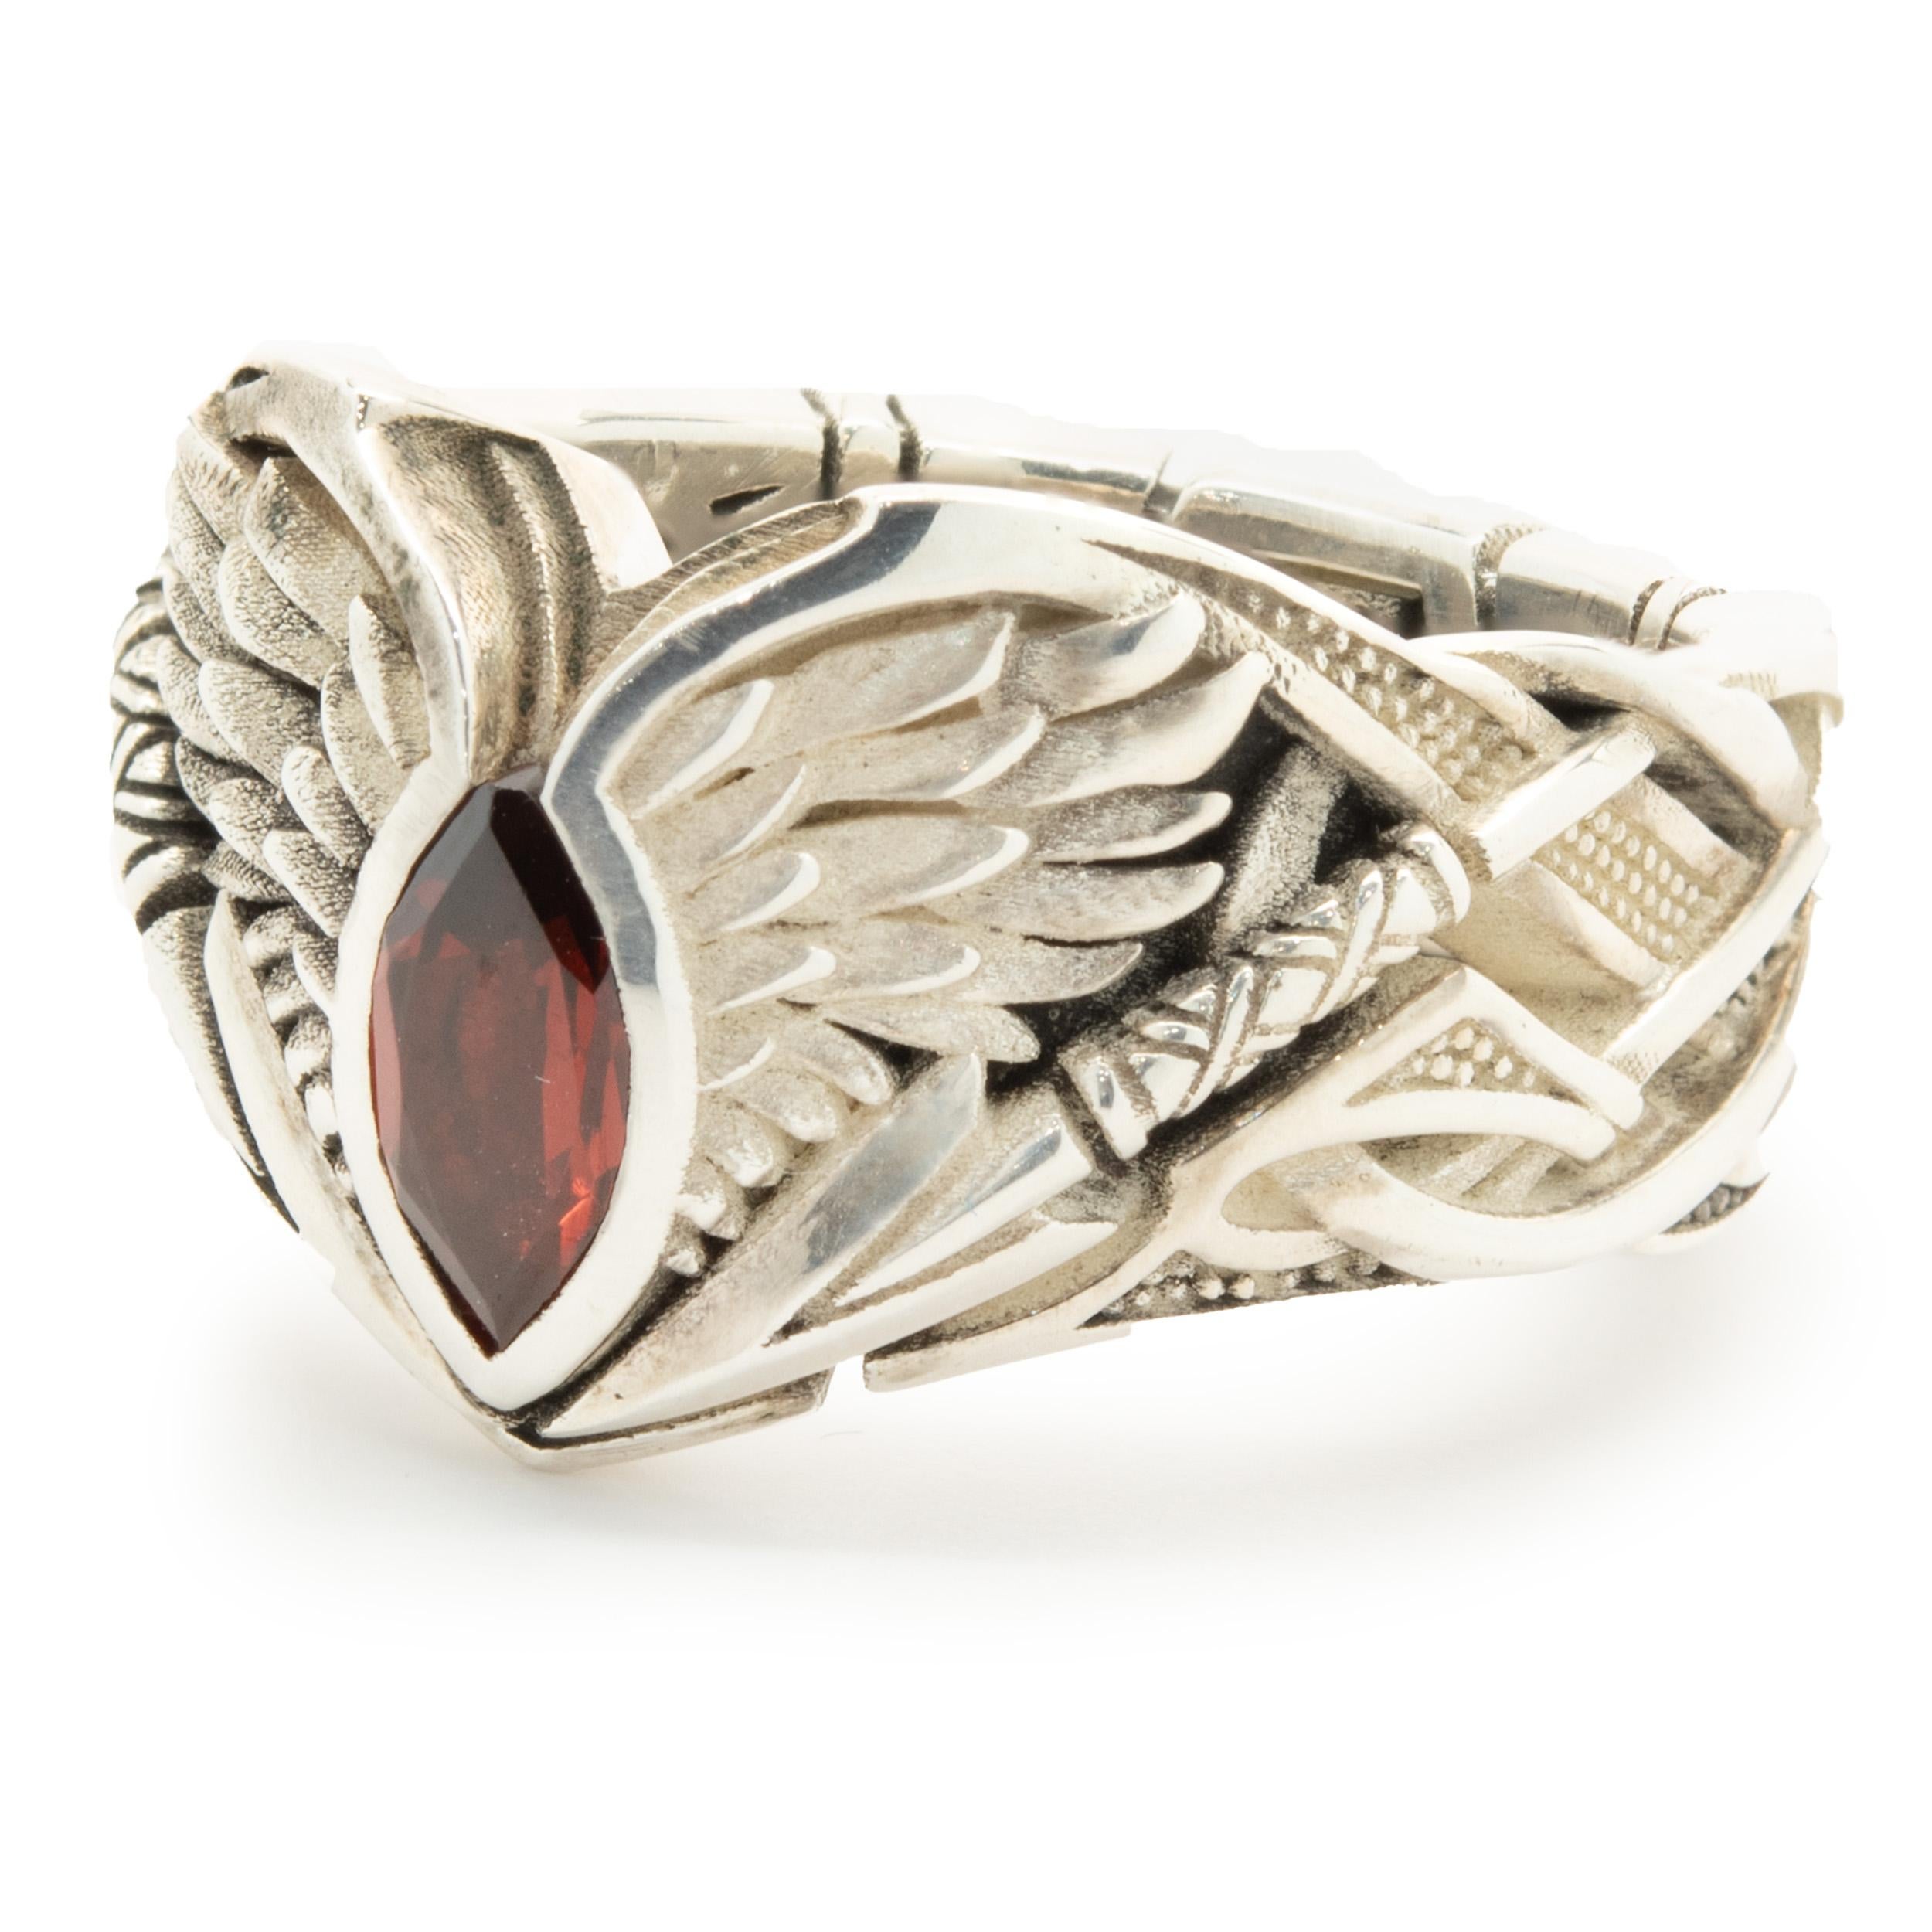 Designer: Knight Rider
Material: sterling silver
Garnet: 1 marquise cut
Measurement: ring top measures 14mm wide
Size: 7.25
Weight: 12.74 grams